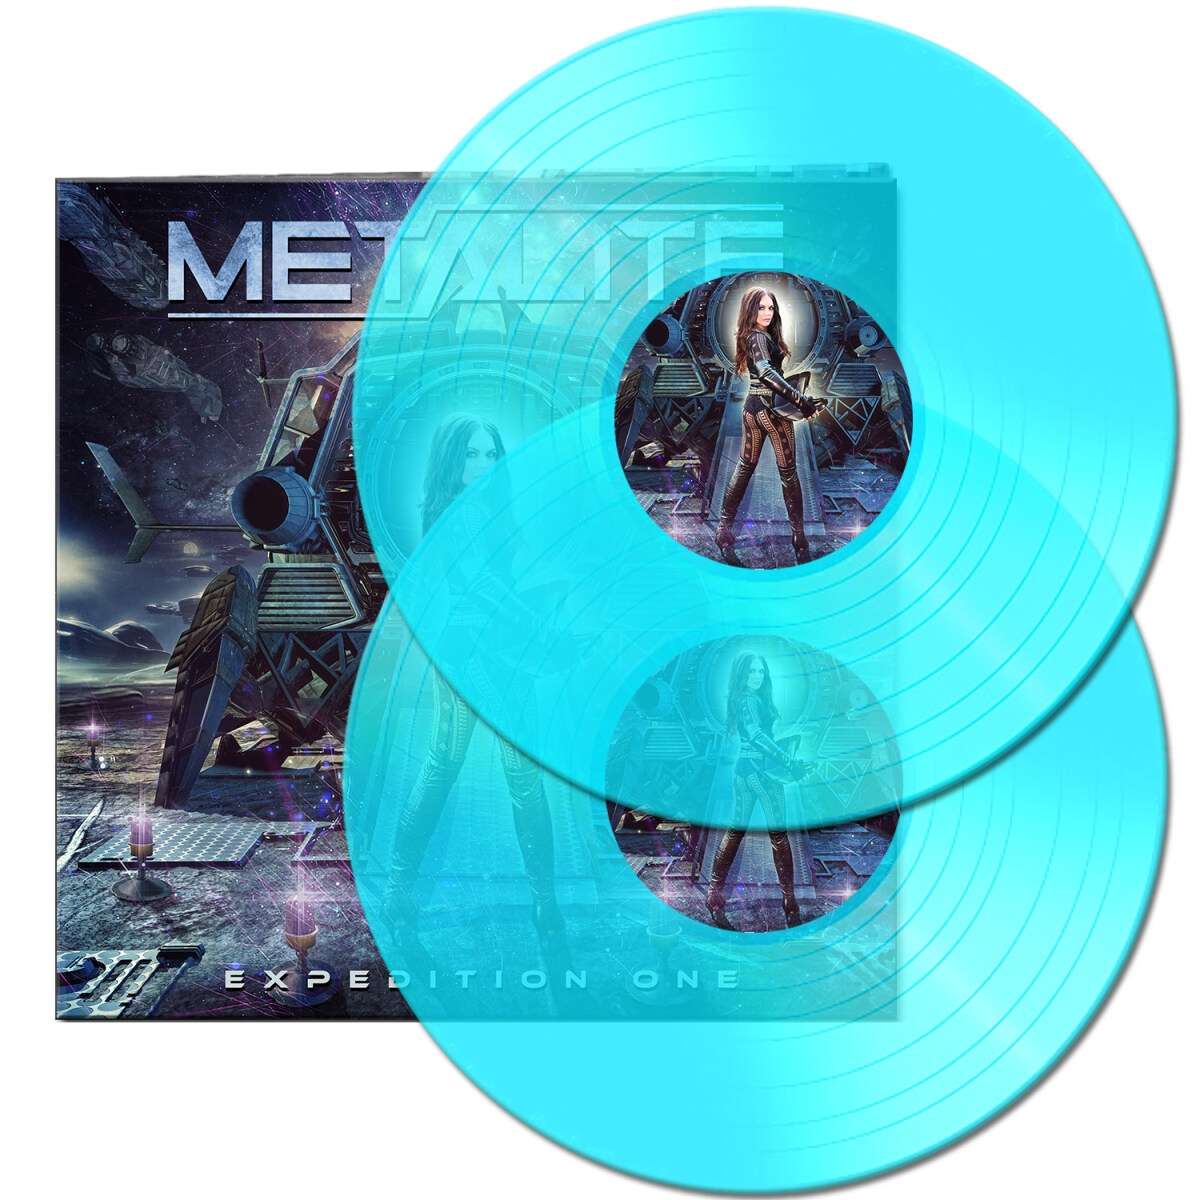 Metalite: Expedition One (Ltd.Gtf.Clear Curacao 2 Vinyl)